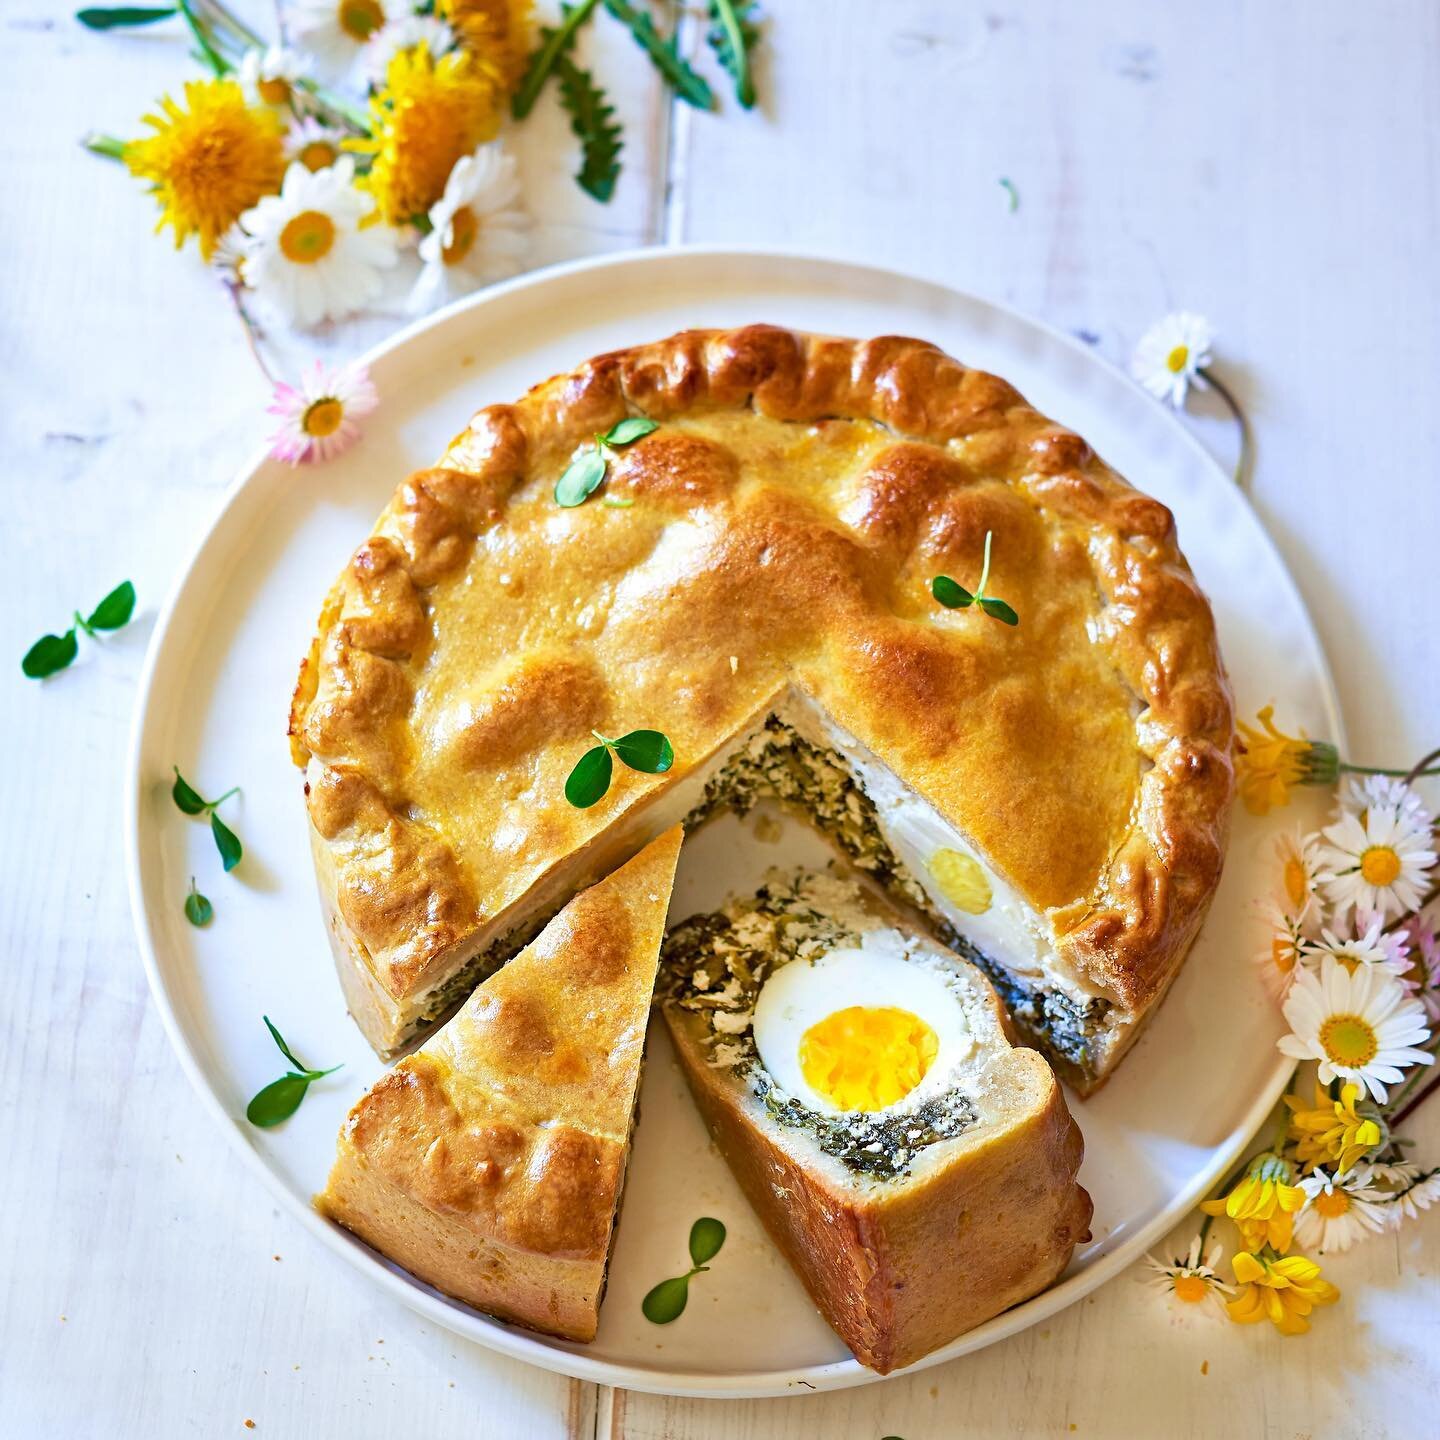 Happy Easter!
&nbsp;
Oftentimes when you think about the food around this holiday, you think of delicious chocolate, beautiful cakes and colorful peeps, so instead of sweets, we're sharing savory Easter dishes from around the world!&nbsp;&nbsp;
&nbsp